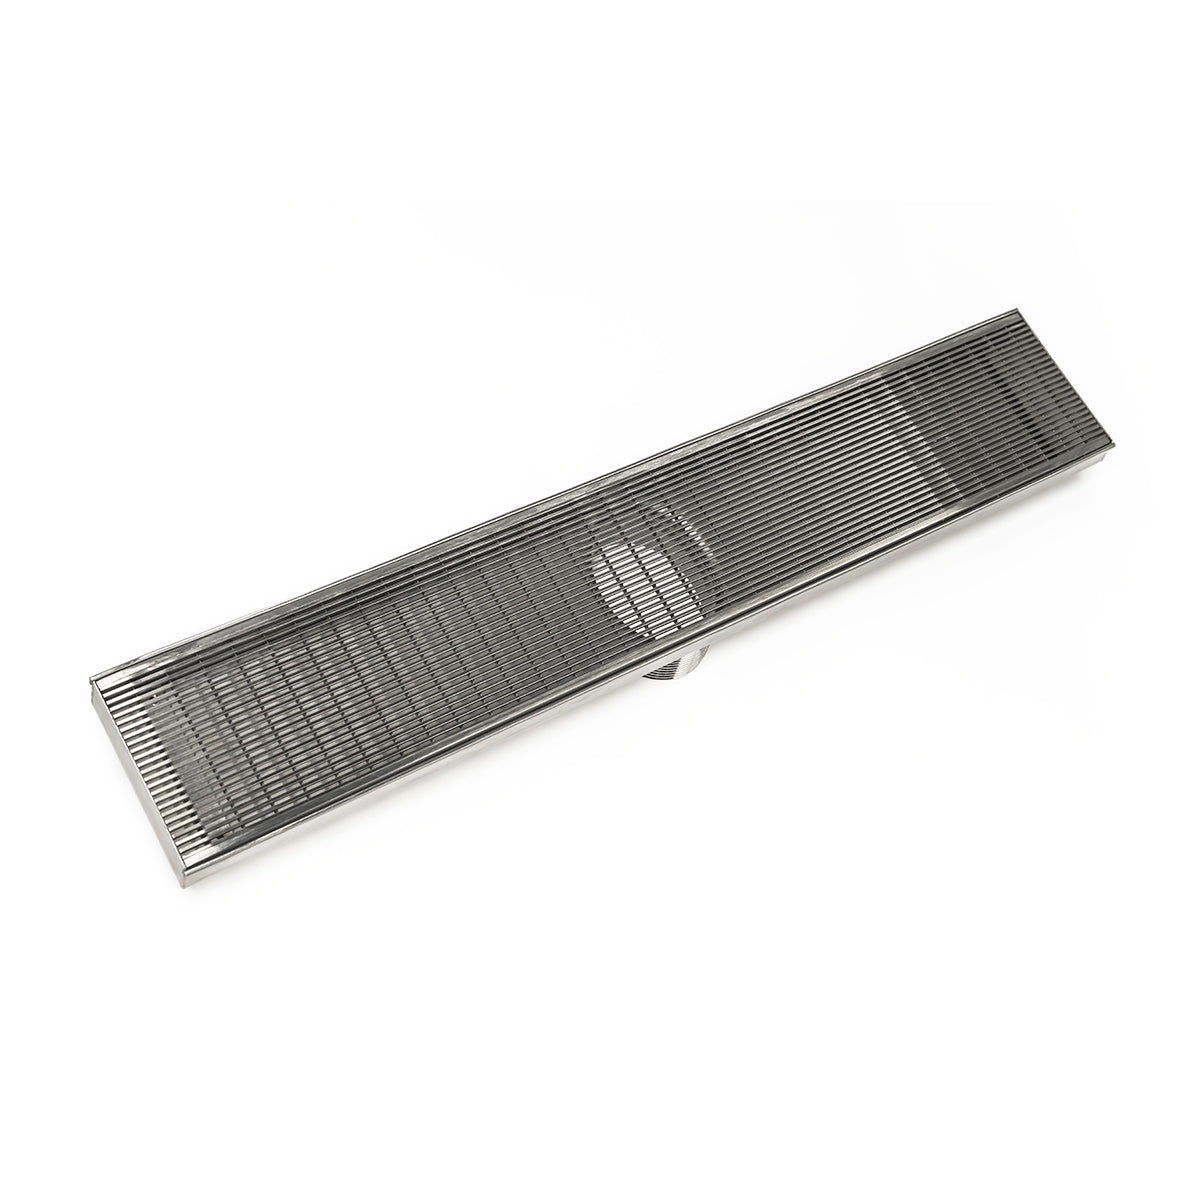 Infinity Drain 42" FX Series High Flow Fixed Length Linear Drain Kit with Wedge Wire Grate with PVC Drain Body